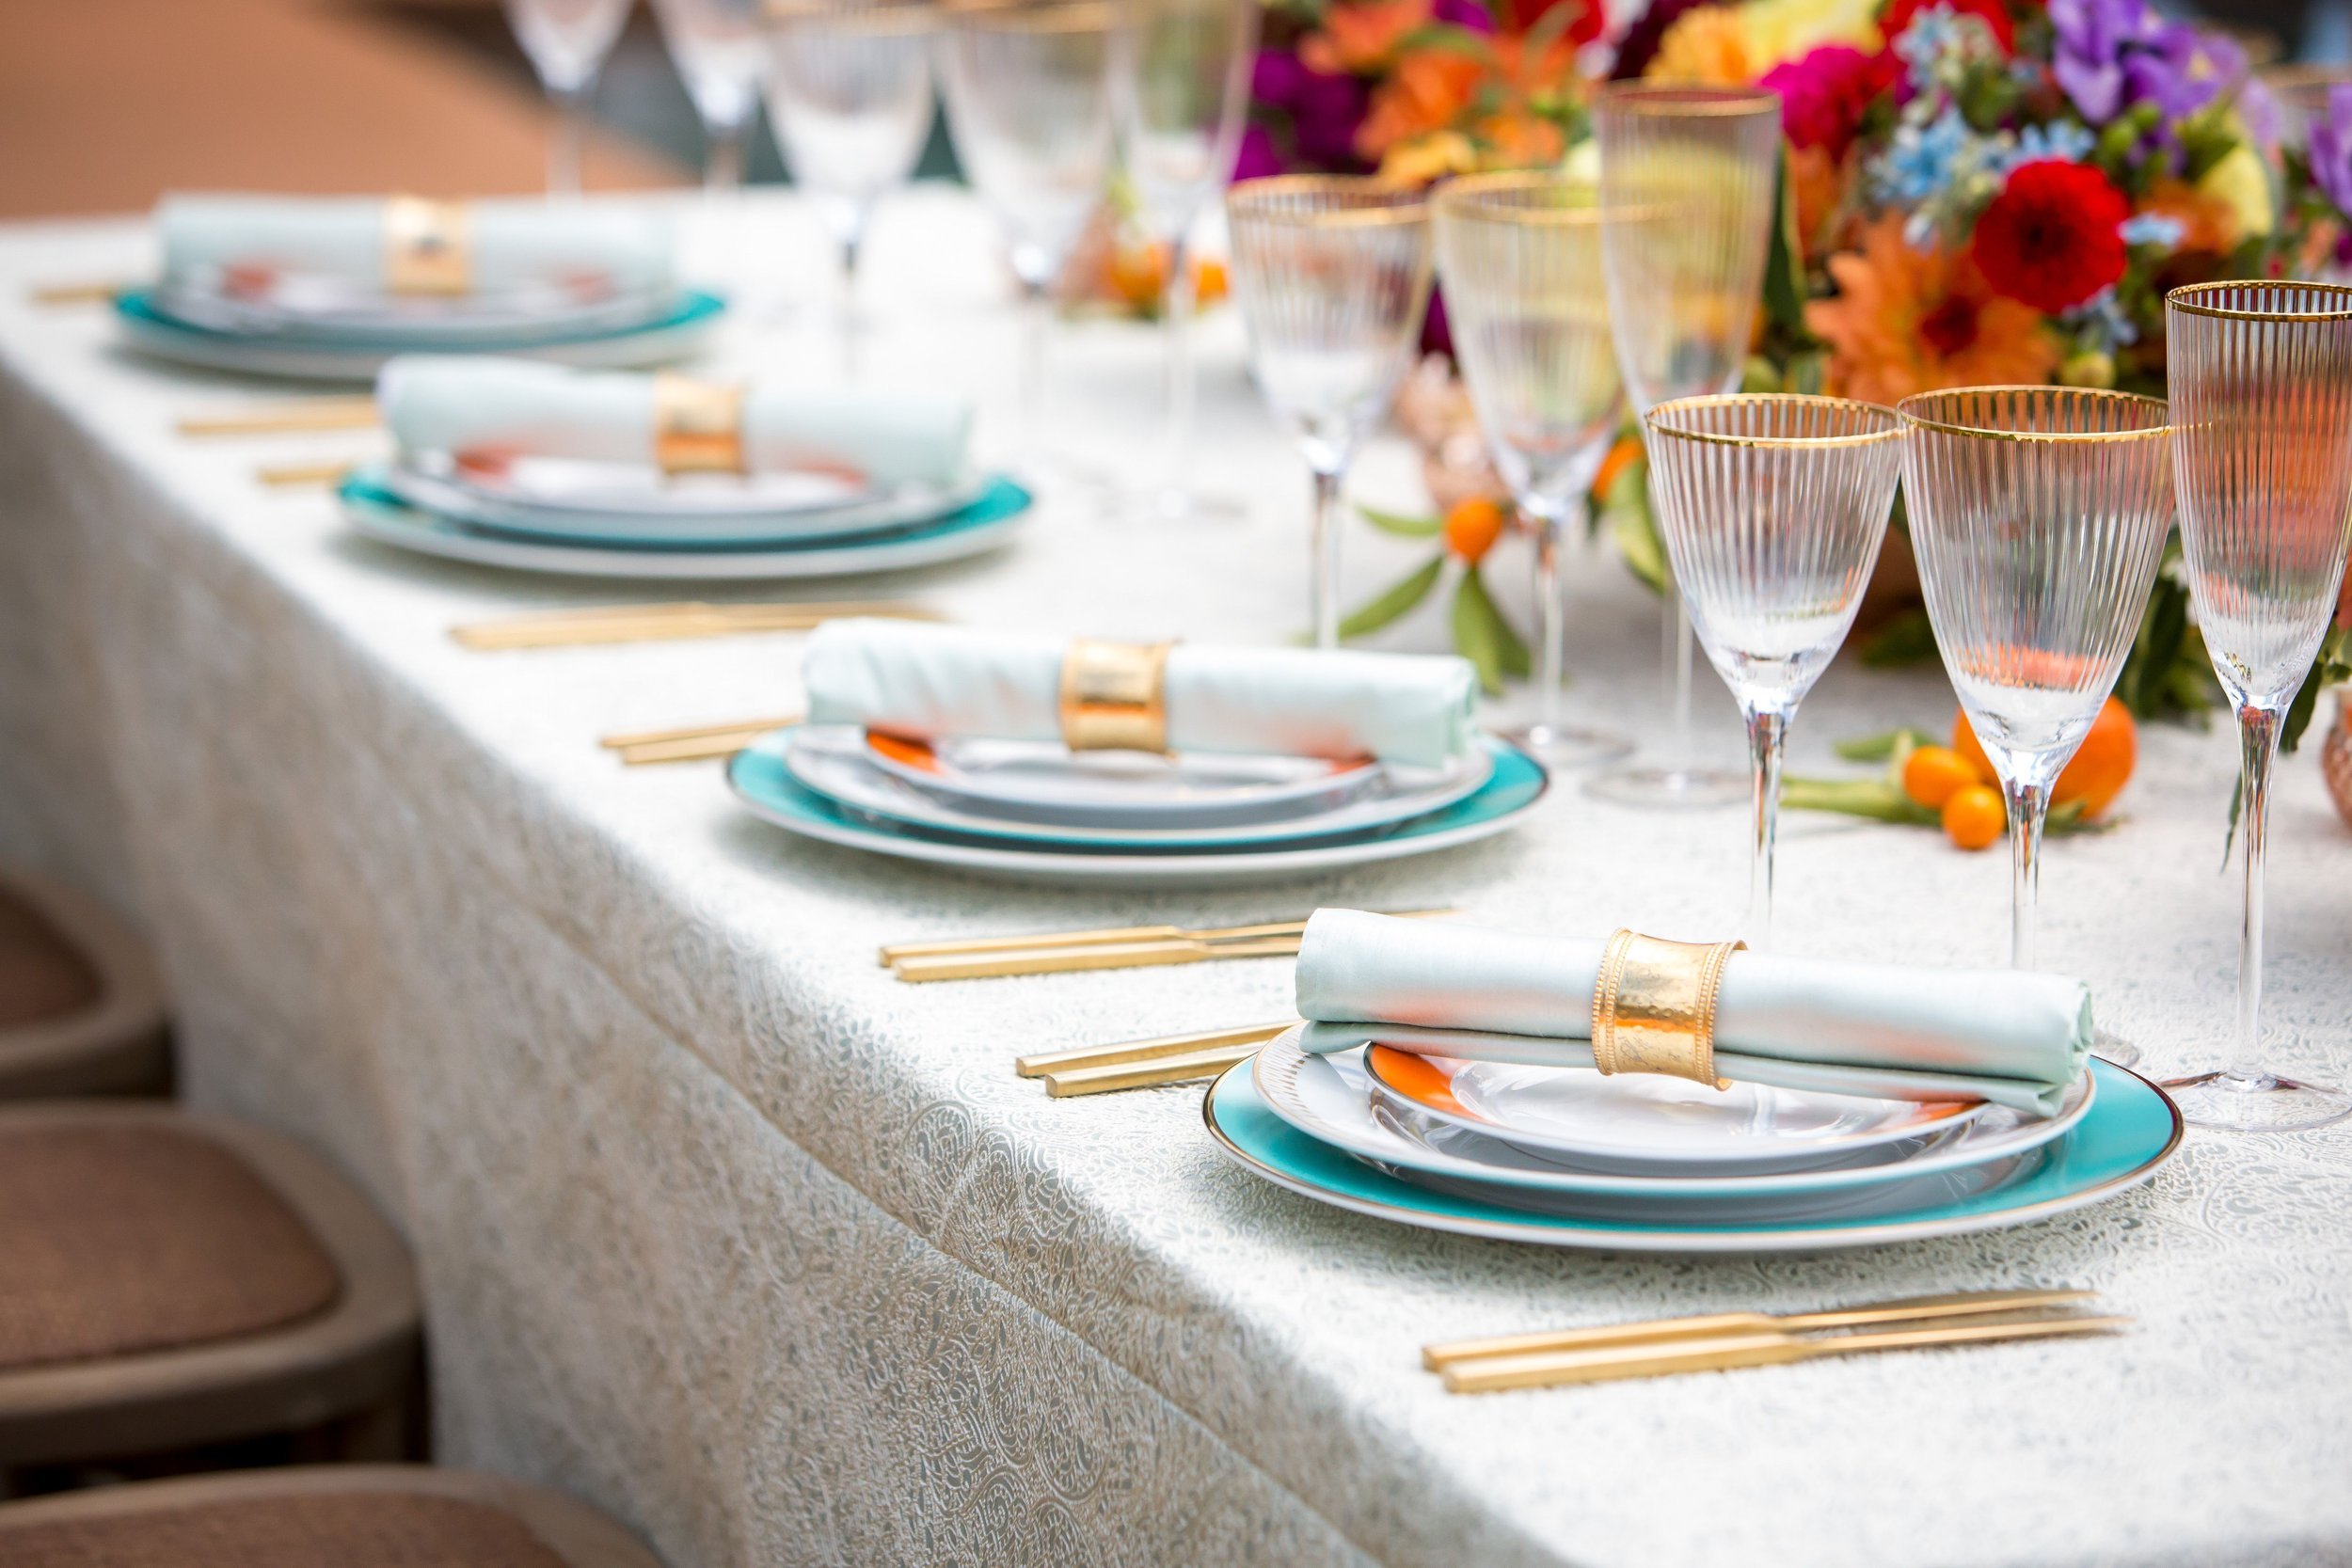 www.santabarbarawedding.com | Bright Event Rentals | Vanity Portrait Studio | Place Settings with Blue, White, and Orange Plates, Gold Silverware, and Gold-Rimmed Stemware